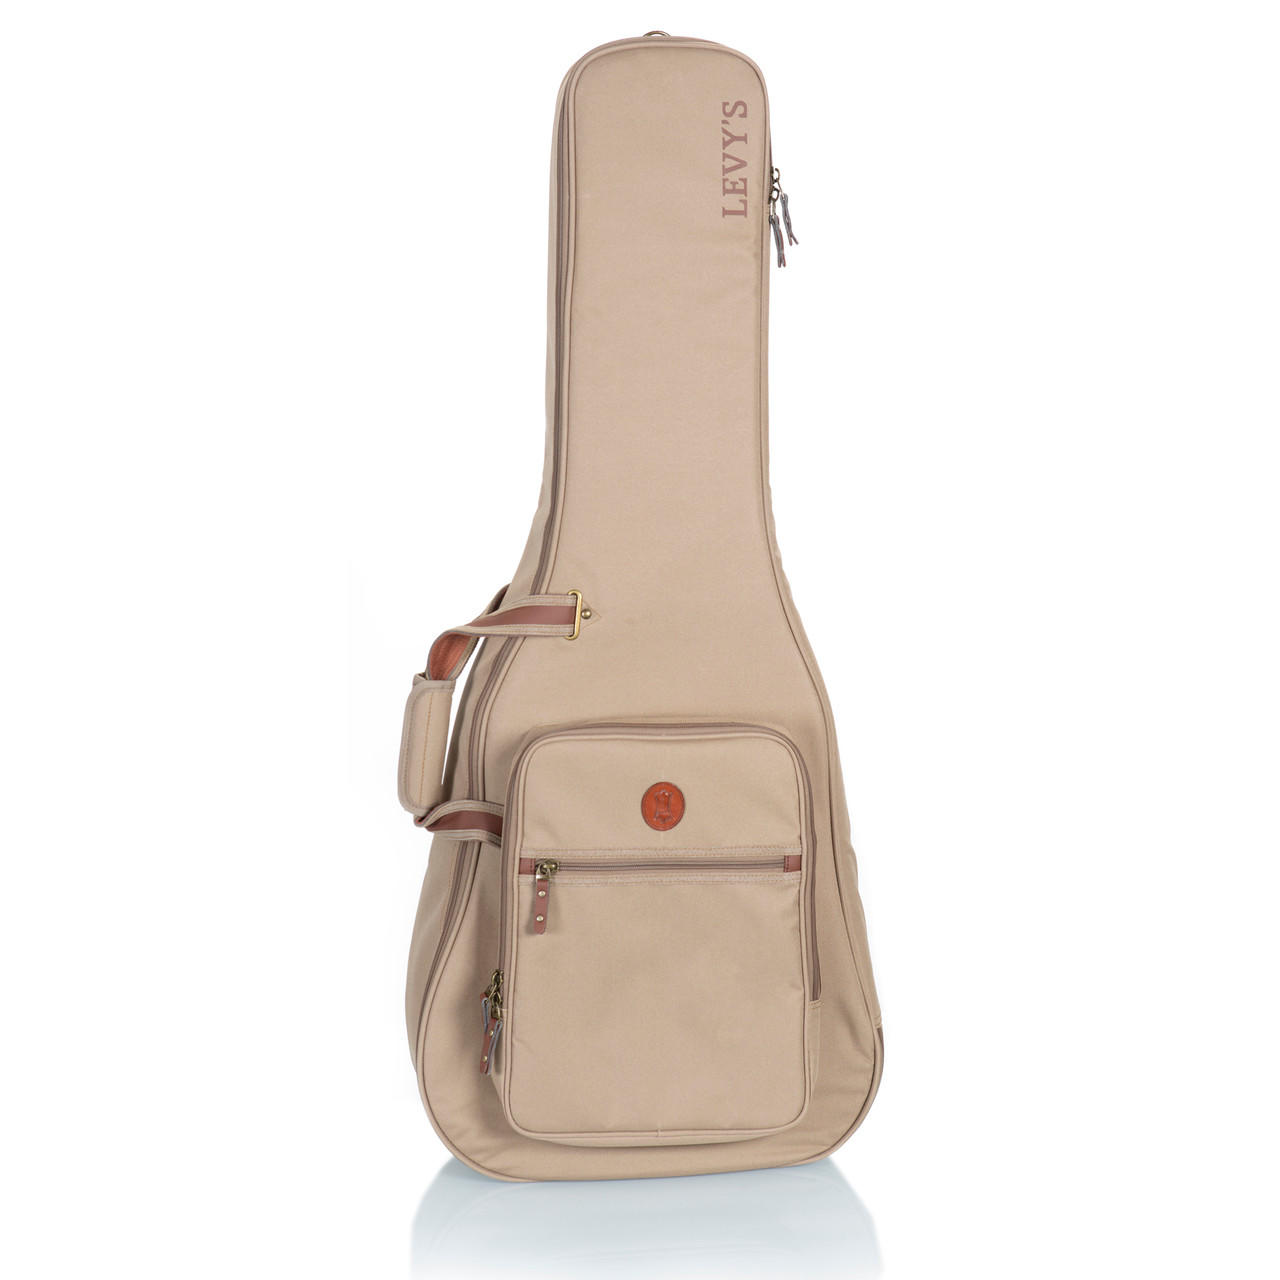 Levy's Deluxe Gig Bag for Electric Guitars - Tan | Cream City Music